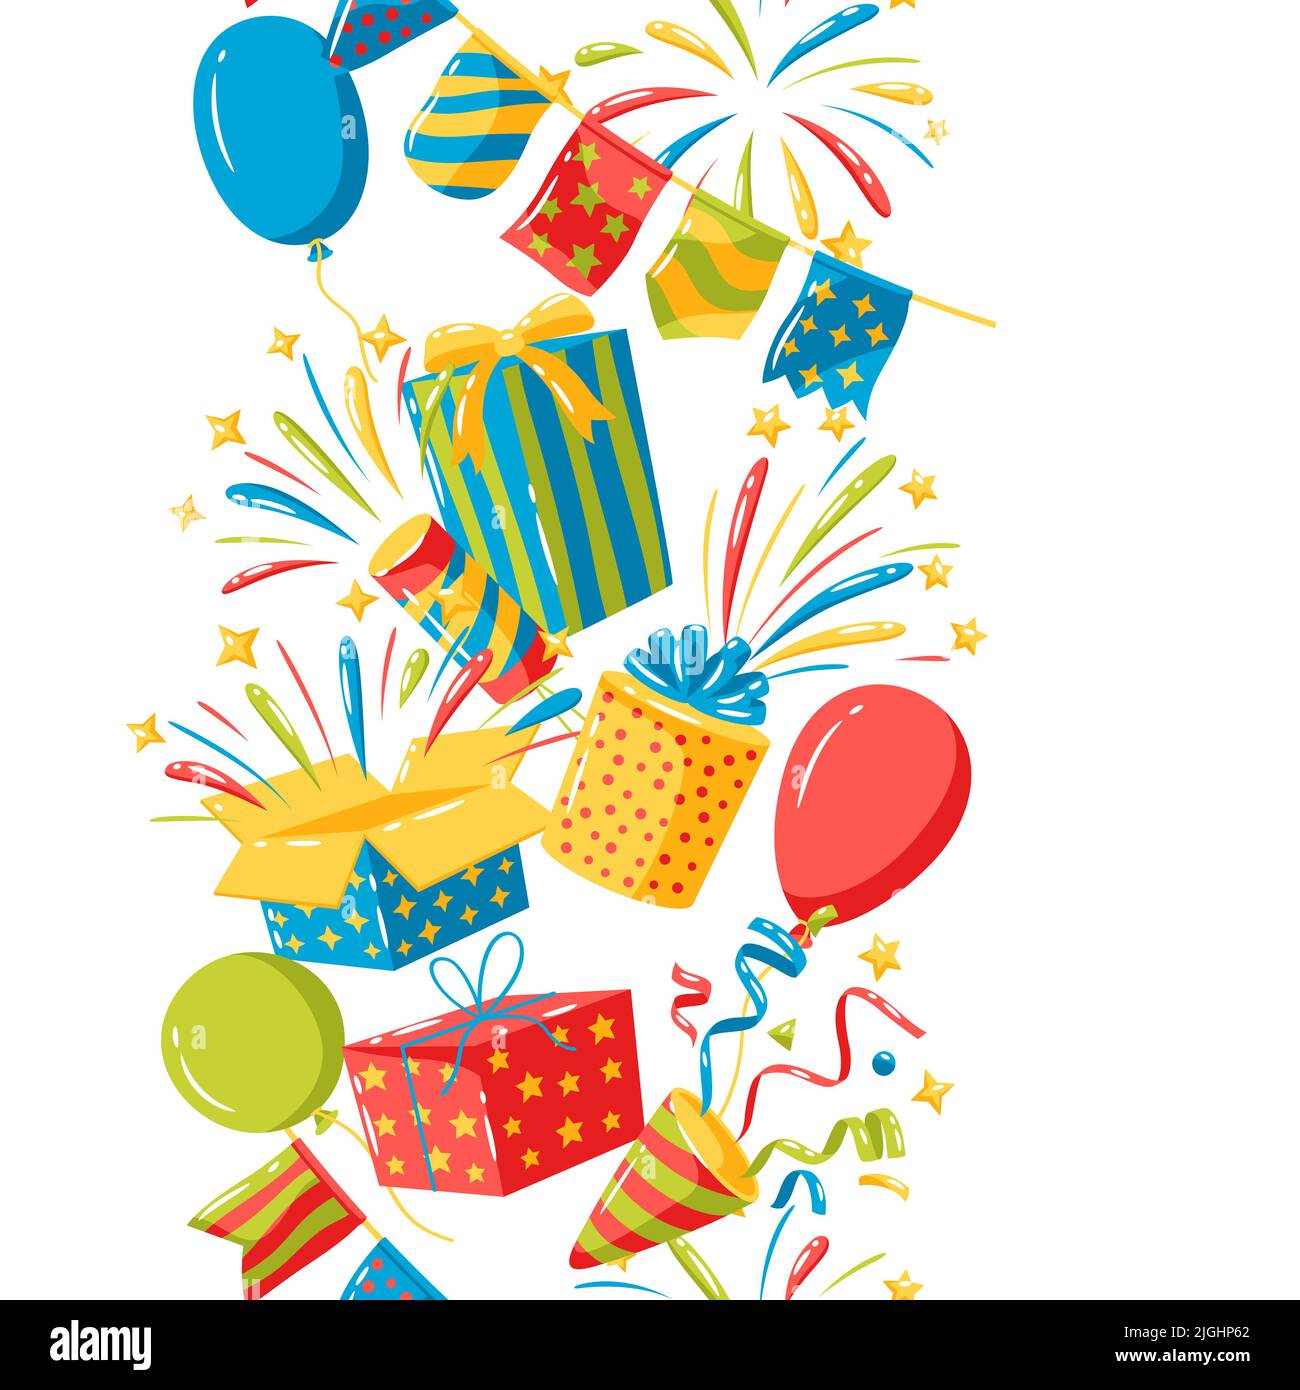 Seamless pattern with holiday decoration items. Color objects for celebration, party and anniversary. Stock Vector